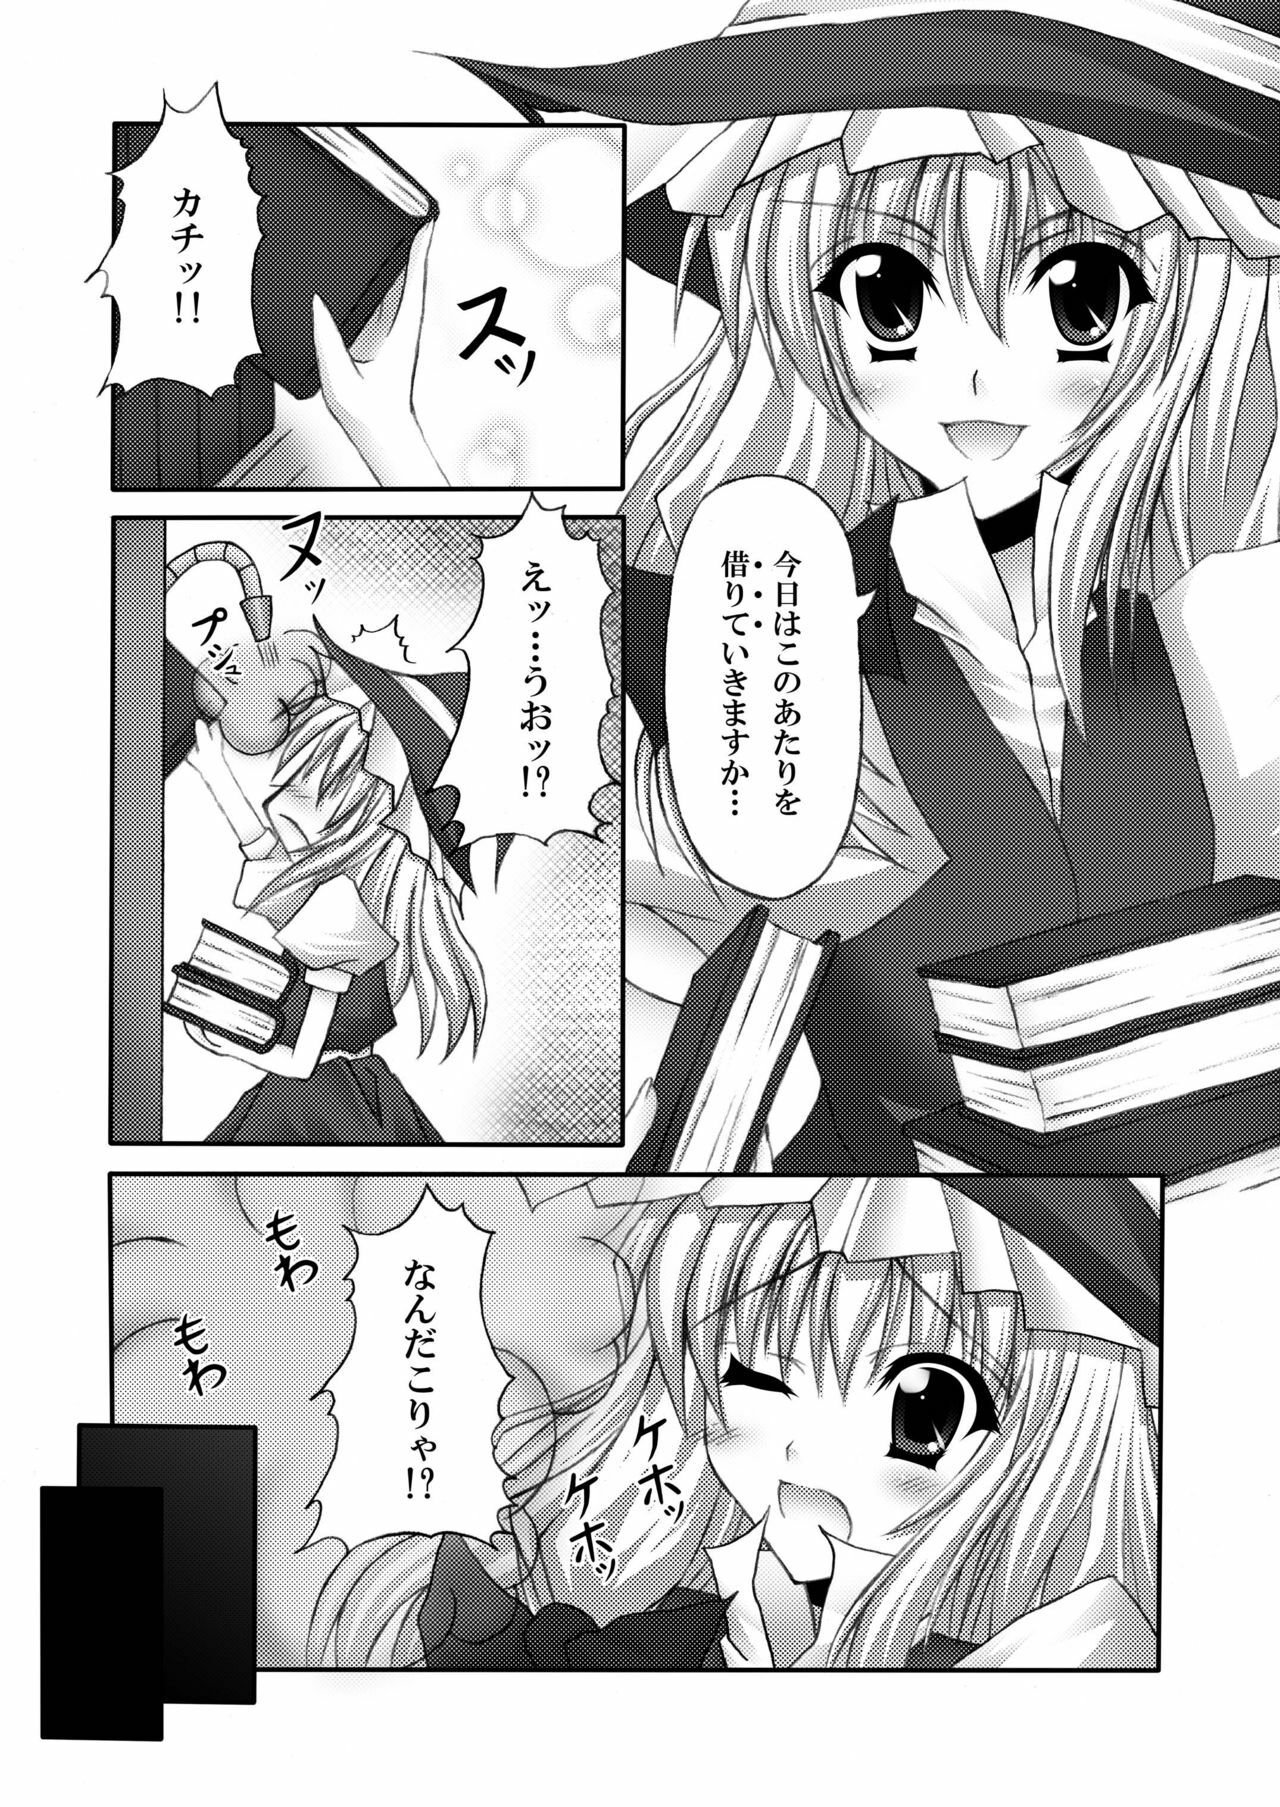 [Chronicle (YUKITO)] Only my wizard (Touhou Project) [Digital] page 5 full